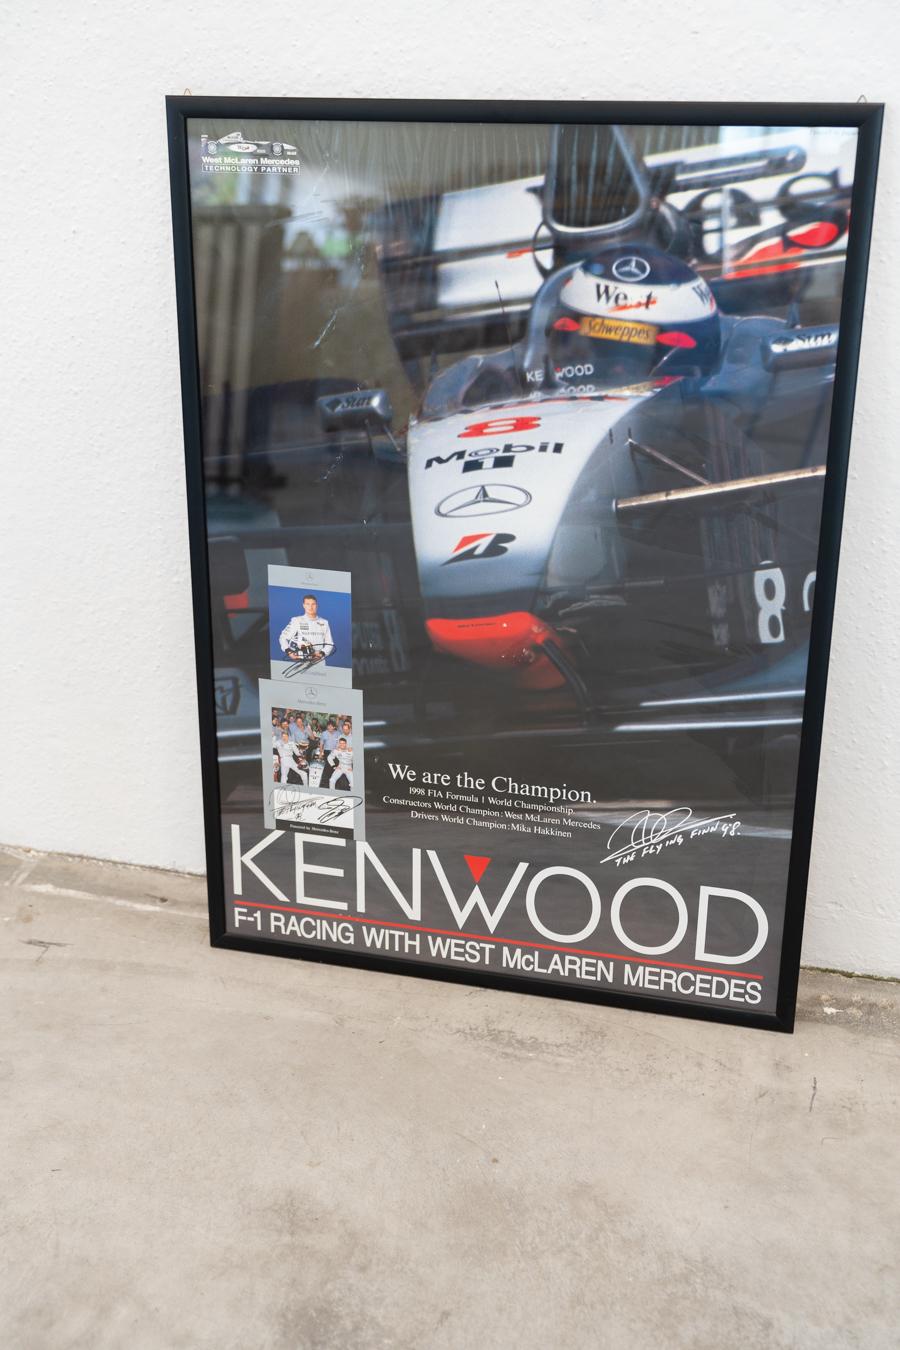 Poster West McLaren Mercedes, FIA FORMULA 1, 1998
H107 x W76 x D1.5 - Kg5
Style
Italiano moderno
Periodo del design
1990 – 1999
Production Period
1990 – 1999
Year Manufactured
1998
Country of Manufacture
Italy
Material
Wood, Photo Paper,